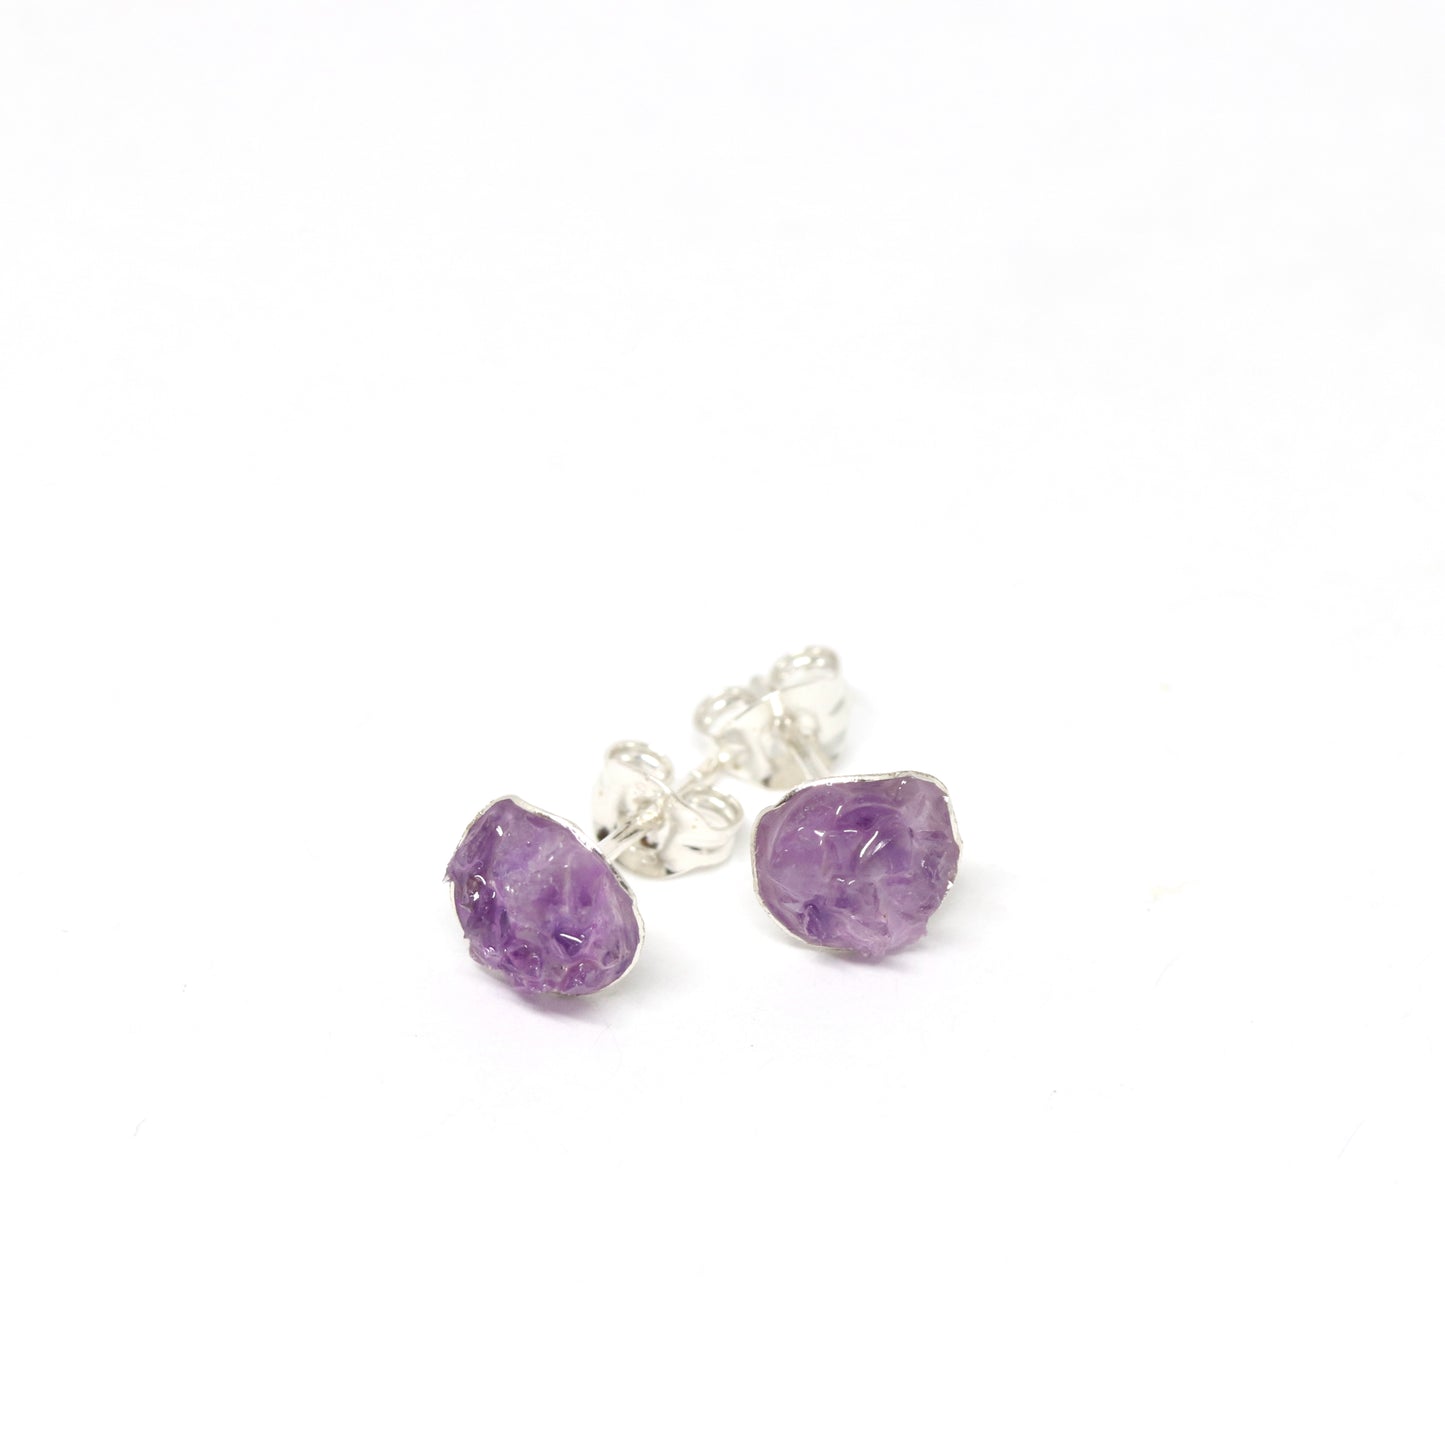 Amethyst . Gemstone and silver stud earrings. Made in Wanaka. Unique, colourful jewellery designed and crafted by New Zealand artist and jeweller Briar Hardy-Hesson.